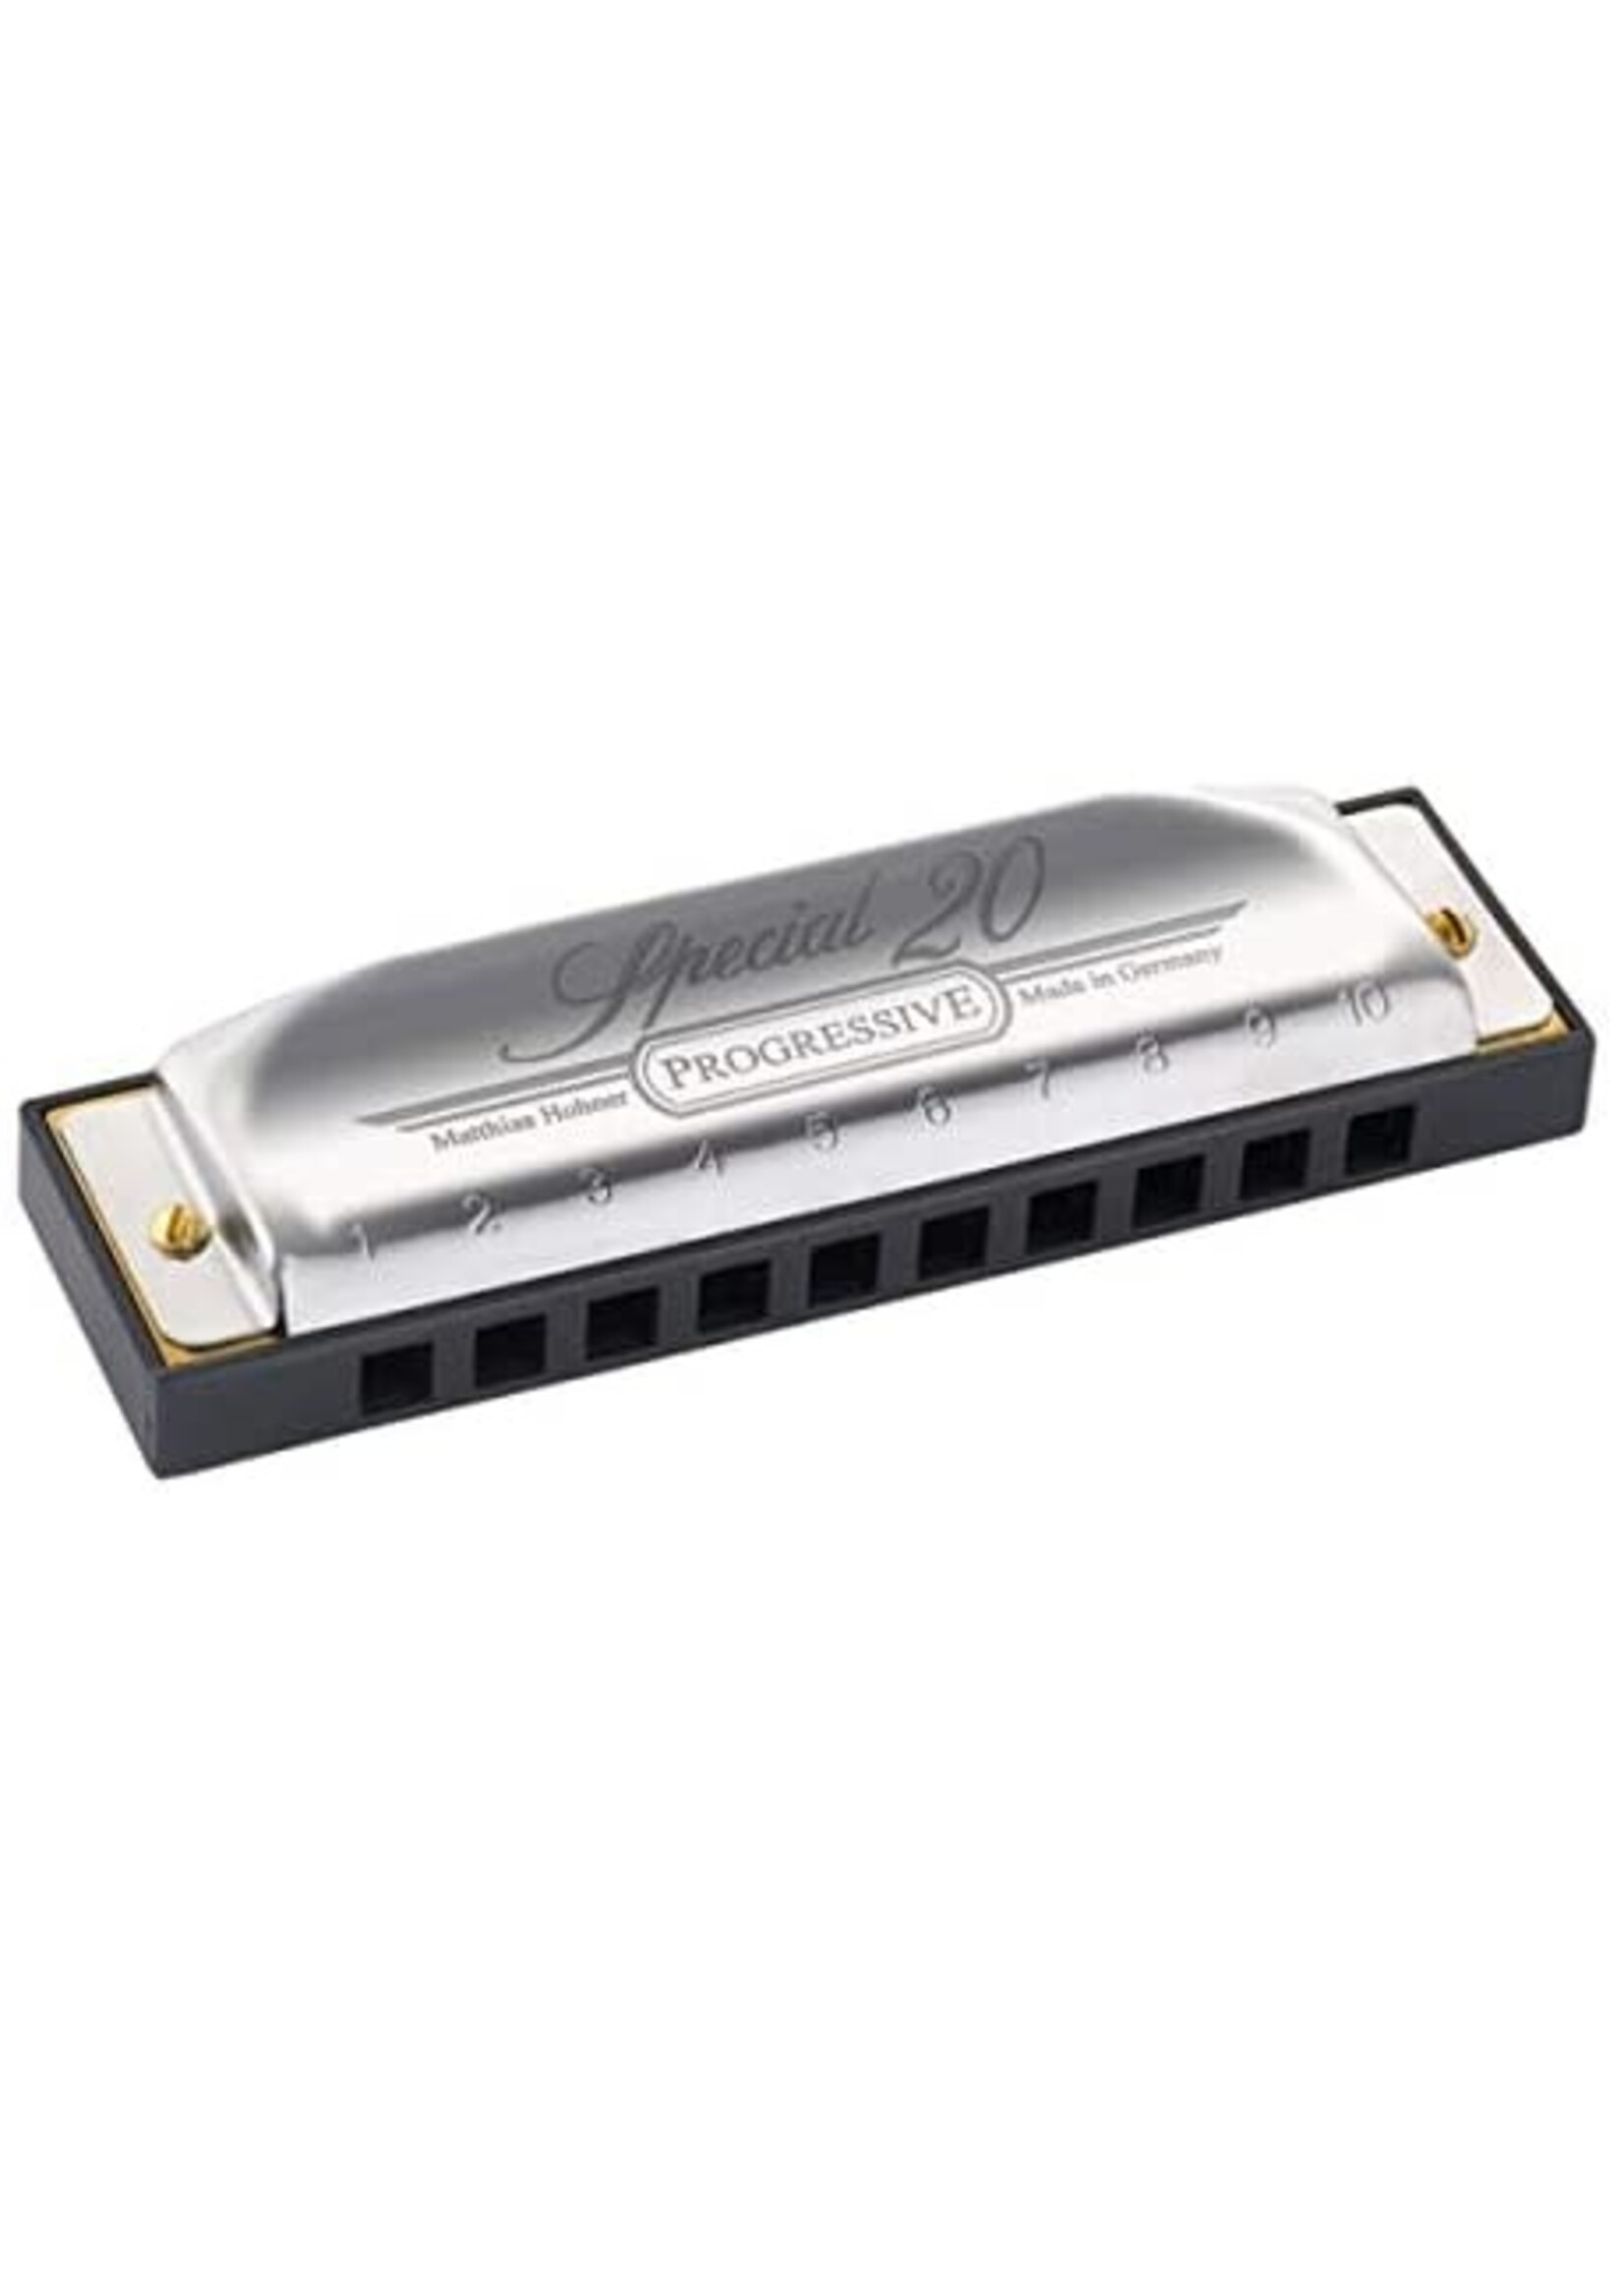 Hohner HOHNER SPECIAL 20 F# w/Free Shipping